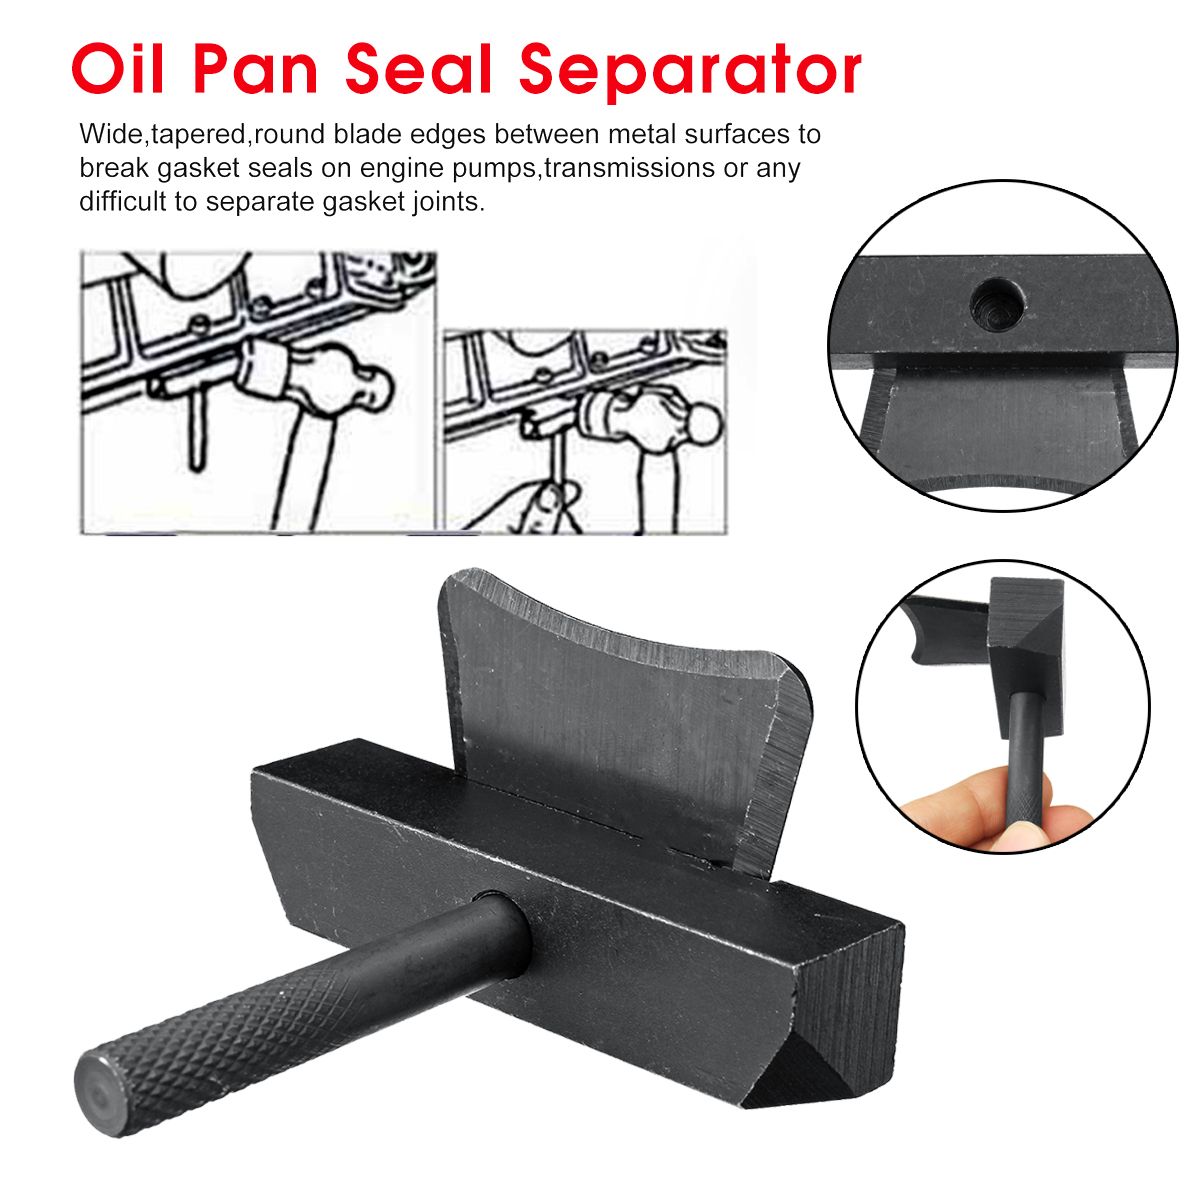 2-in-1-Car-Engine-Pumps-Oil-Pan-Seal-Separator-Oil-Gasket-Remover-Cutter-Tool-1517314